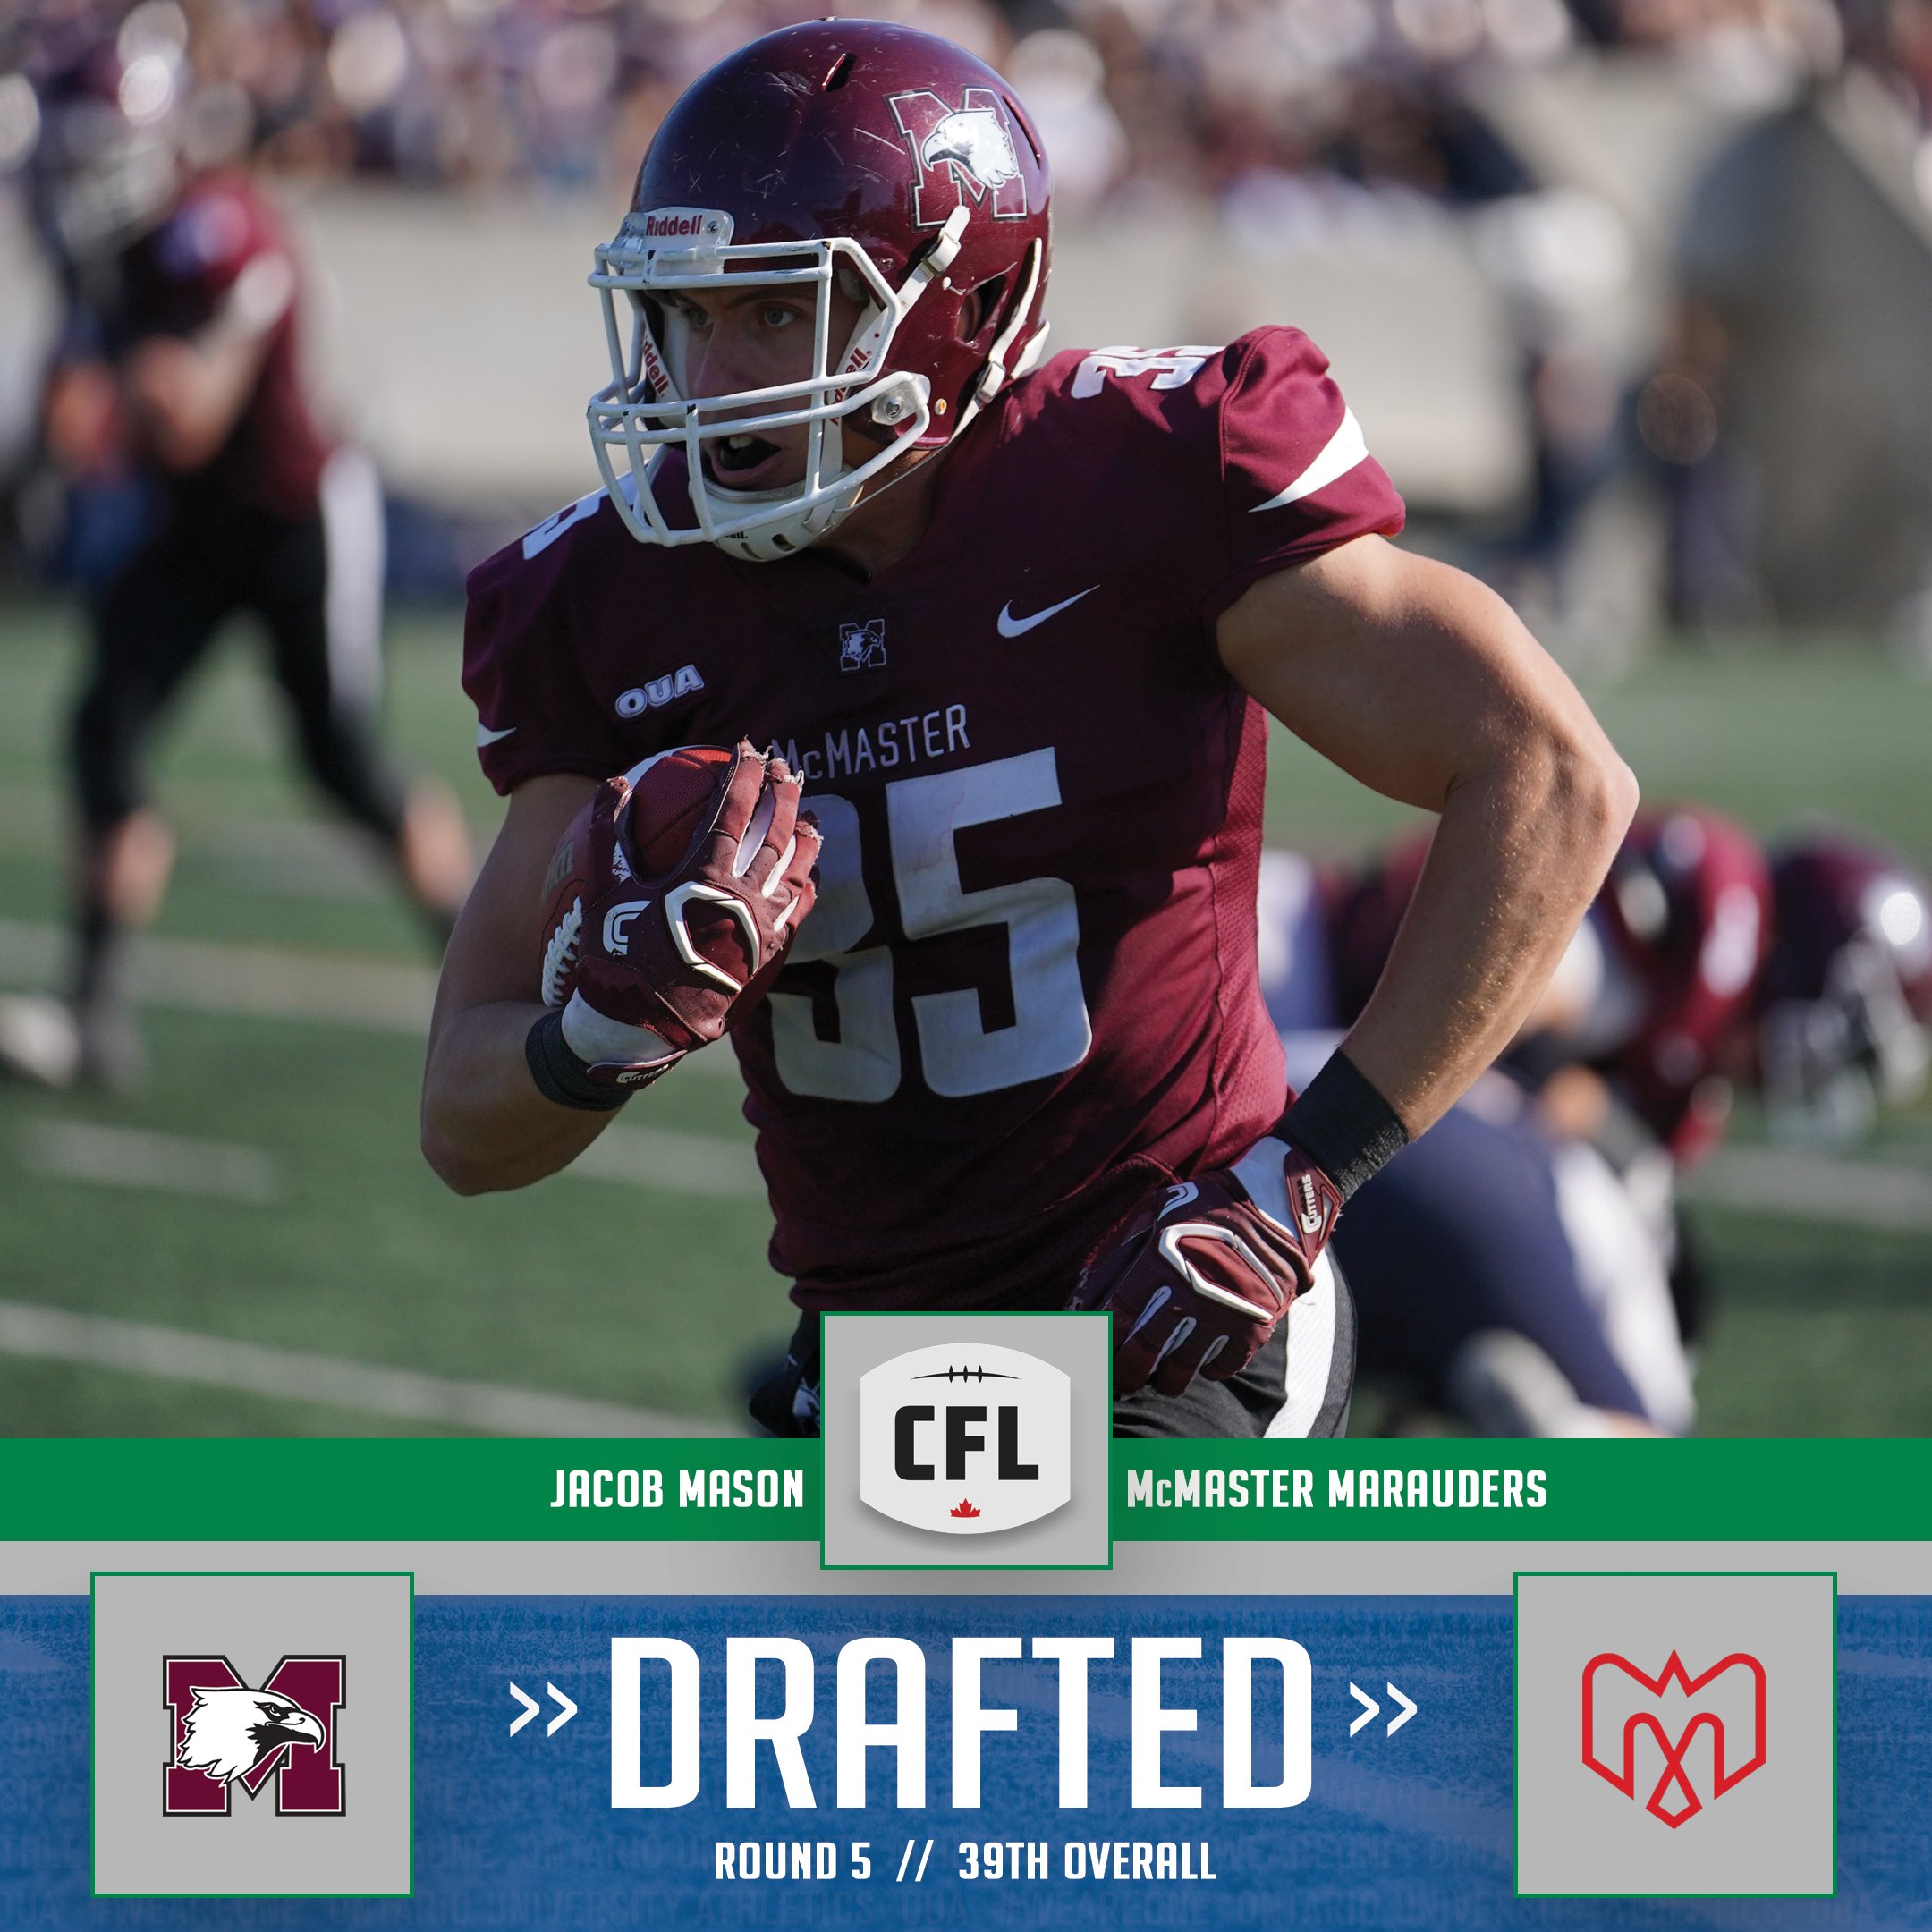 Ontario University Athletics on Twitter: "DRAFTED ☑️ With the 39th pick in  the 2023 #CFLDraft, the @MTLAlouettes select FB Jacob Mason from  @McMasterSports! 🏈 #WeAreONE | #GoMacGo https://t.co/sQUTJ6SCvY" / Twitter